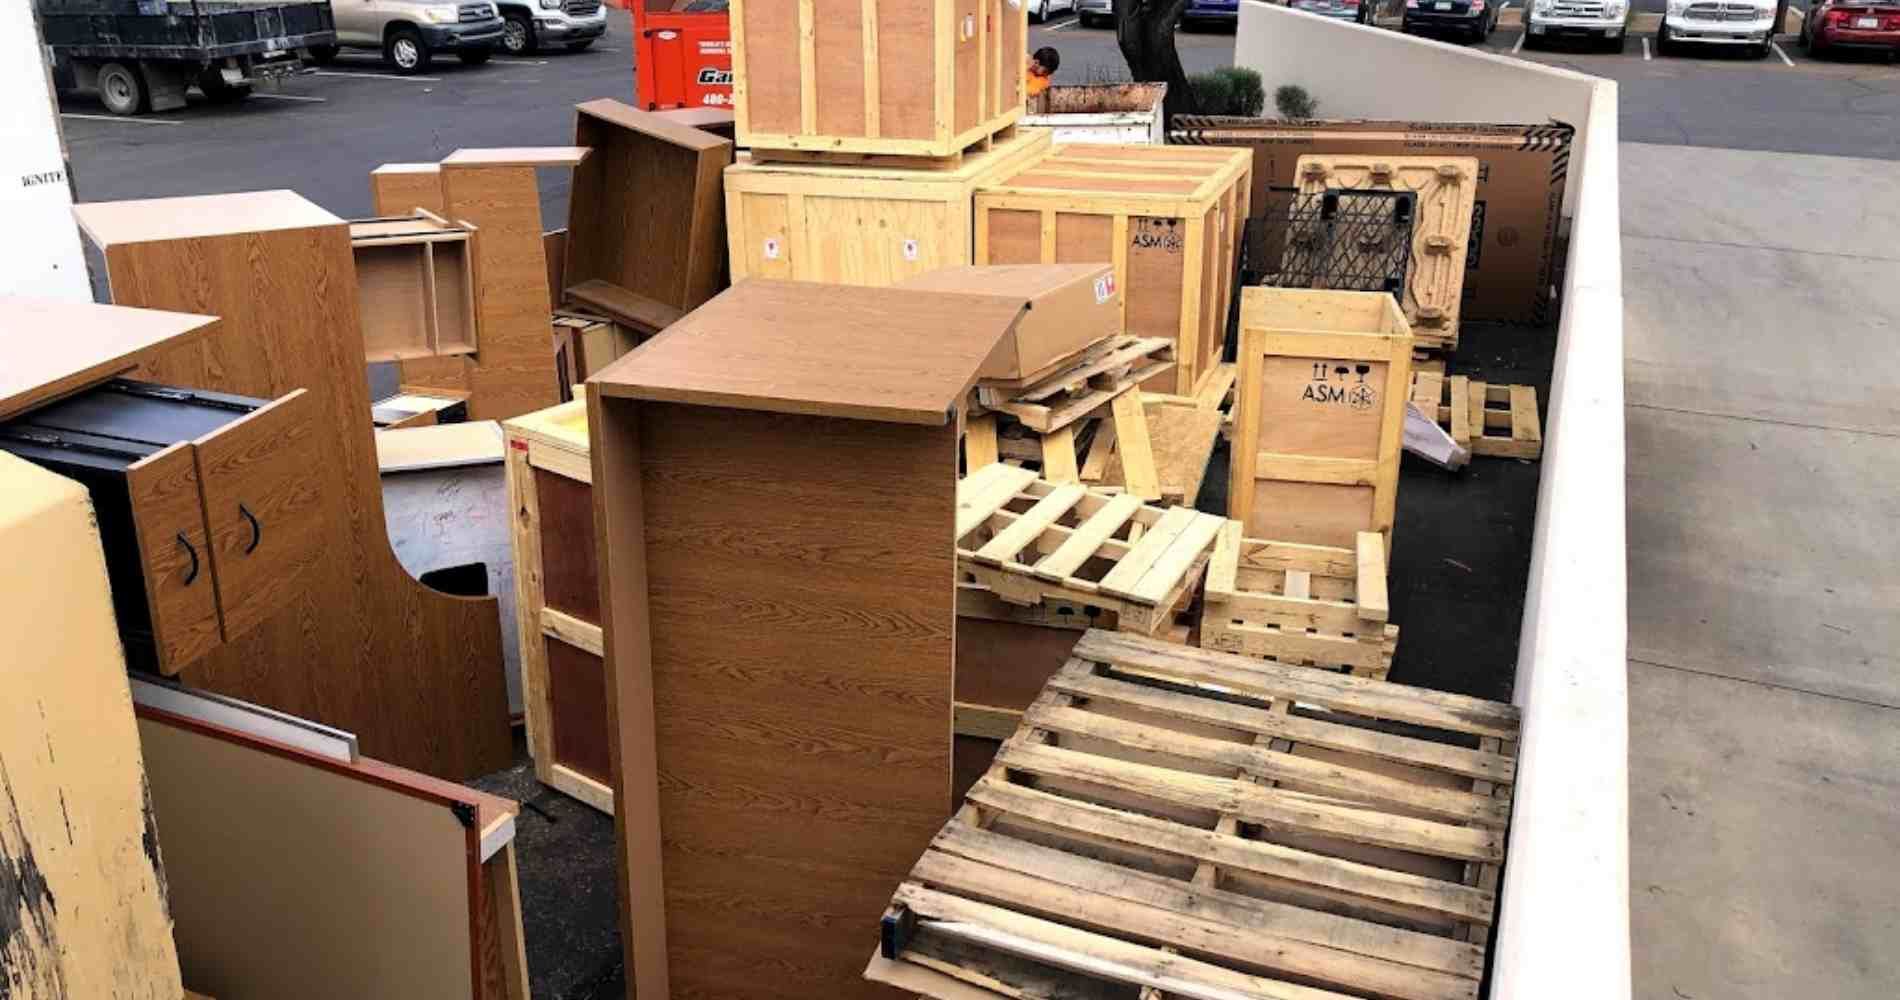 #1 for Pallet Disposal in Surprise, AZ With Over 1200 5-Star Reviews!